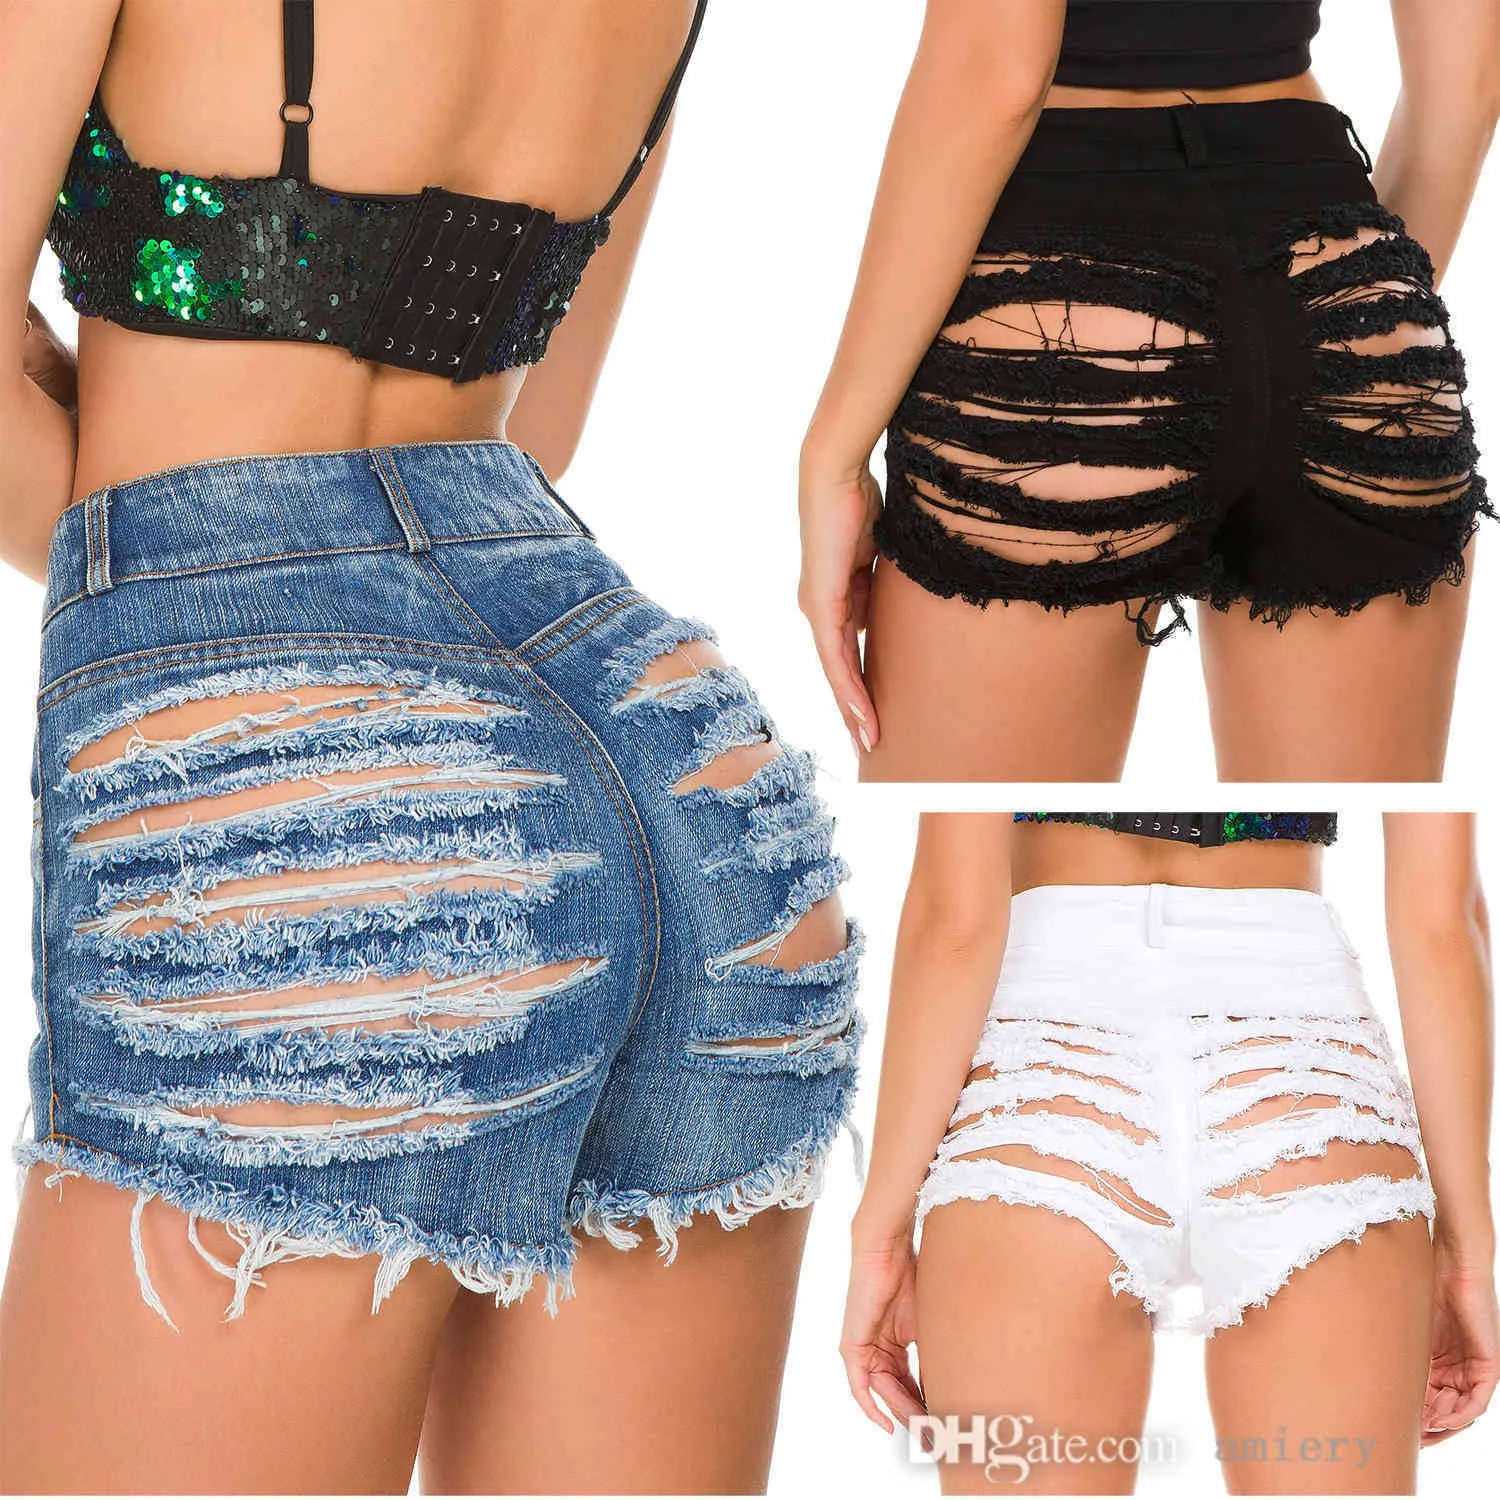 Summer Denim Shorts For Women High Waist, Ripped Holes, Washed Distressed Short  Leggings For Women In White, Black, And Blue From Amiery, $9.75